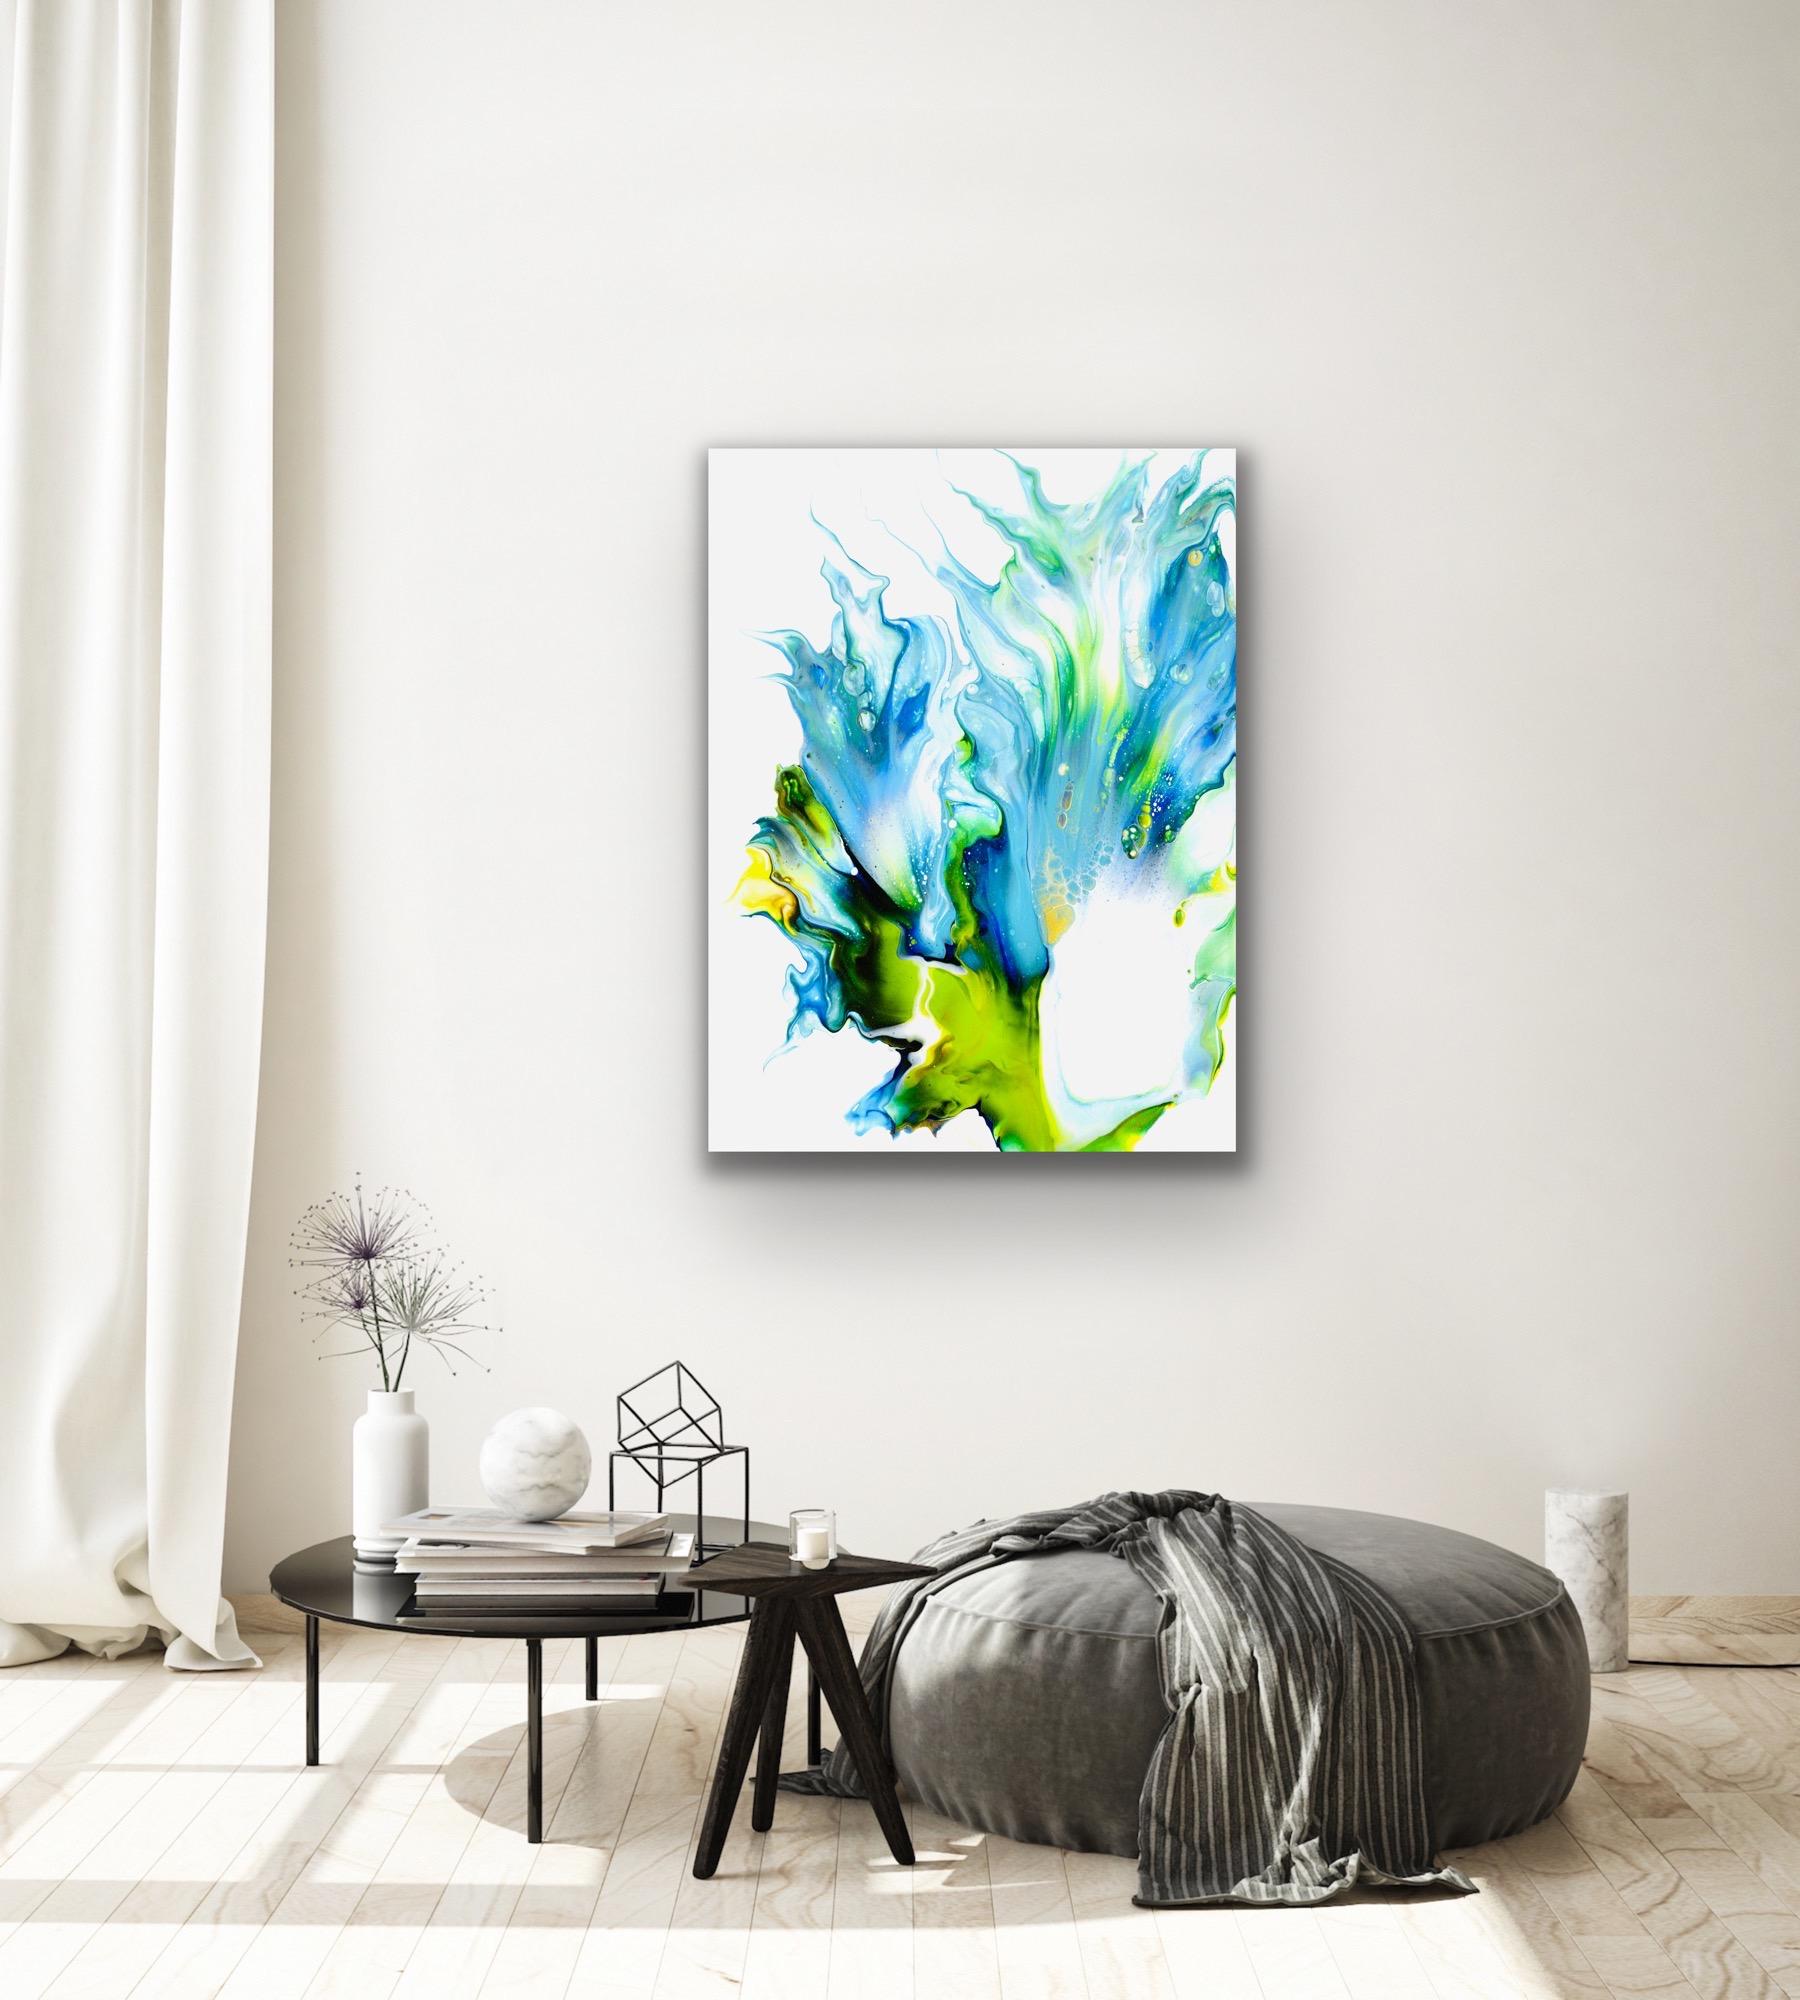 Contemporary Modern Abstract, Giclee Print on Metal, Limited Edition, by Cessy  For Sale 4